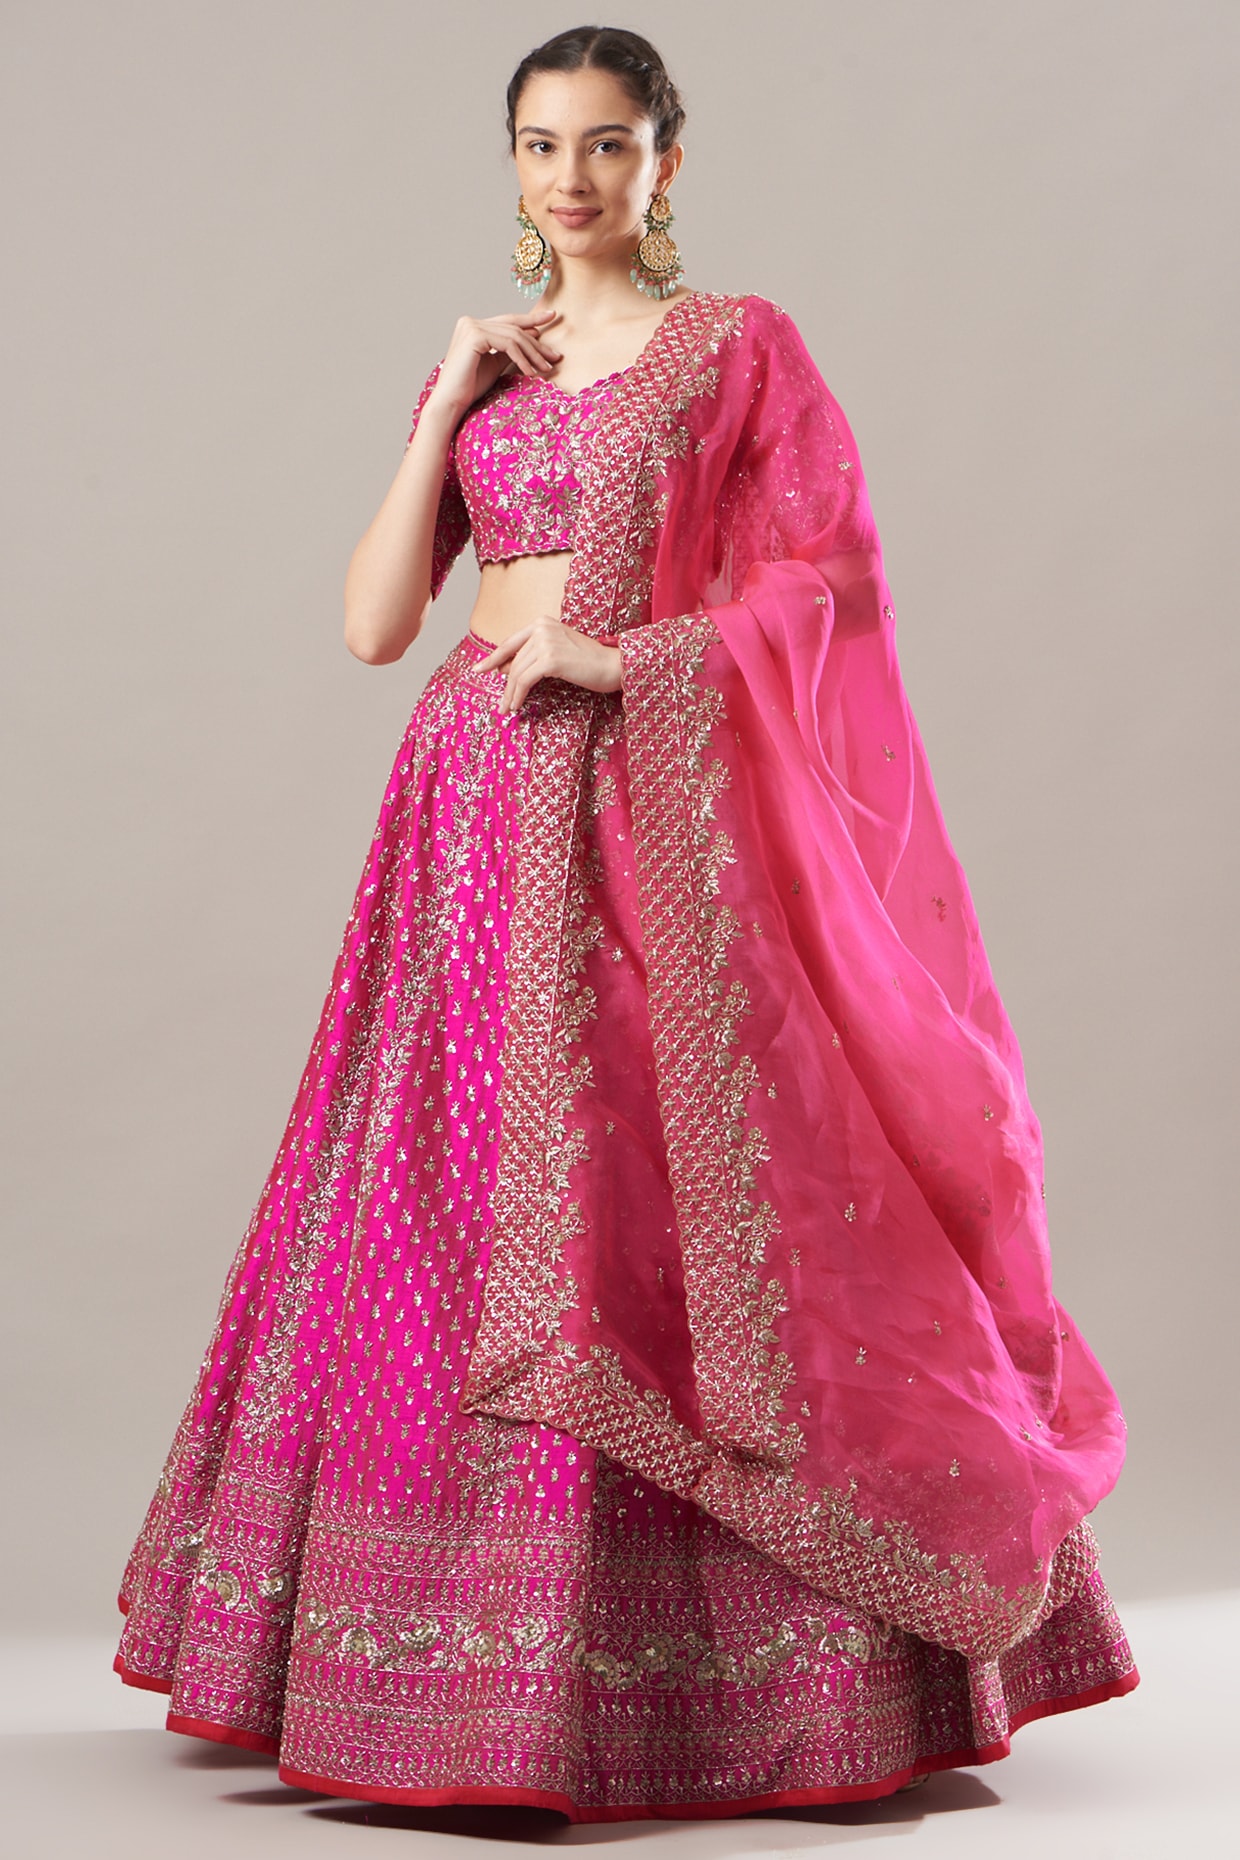 GOWNS - Buy Heavy Designer Indian Gowns Online USA UK Canada